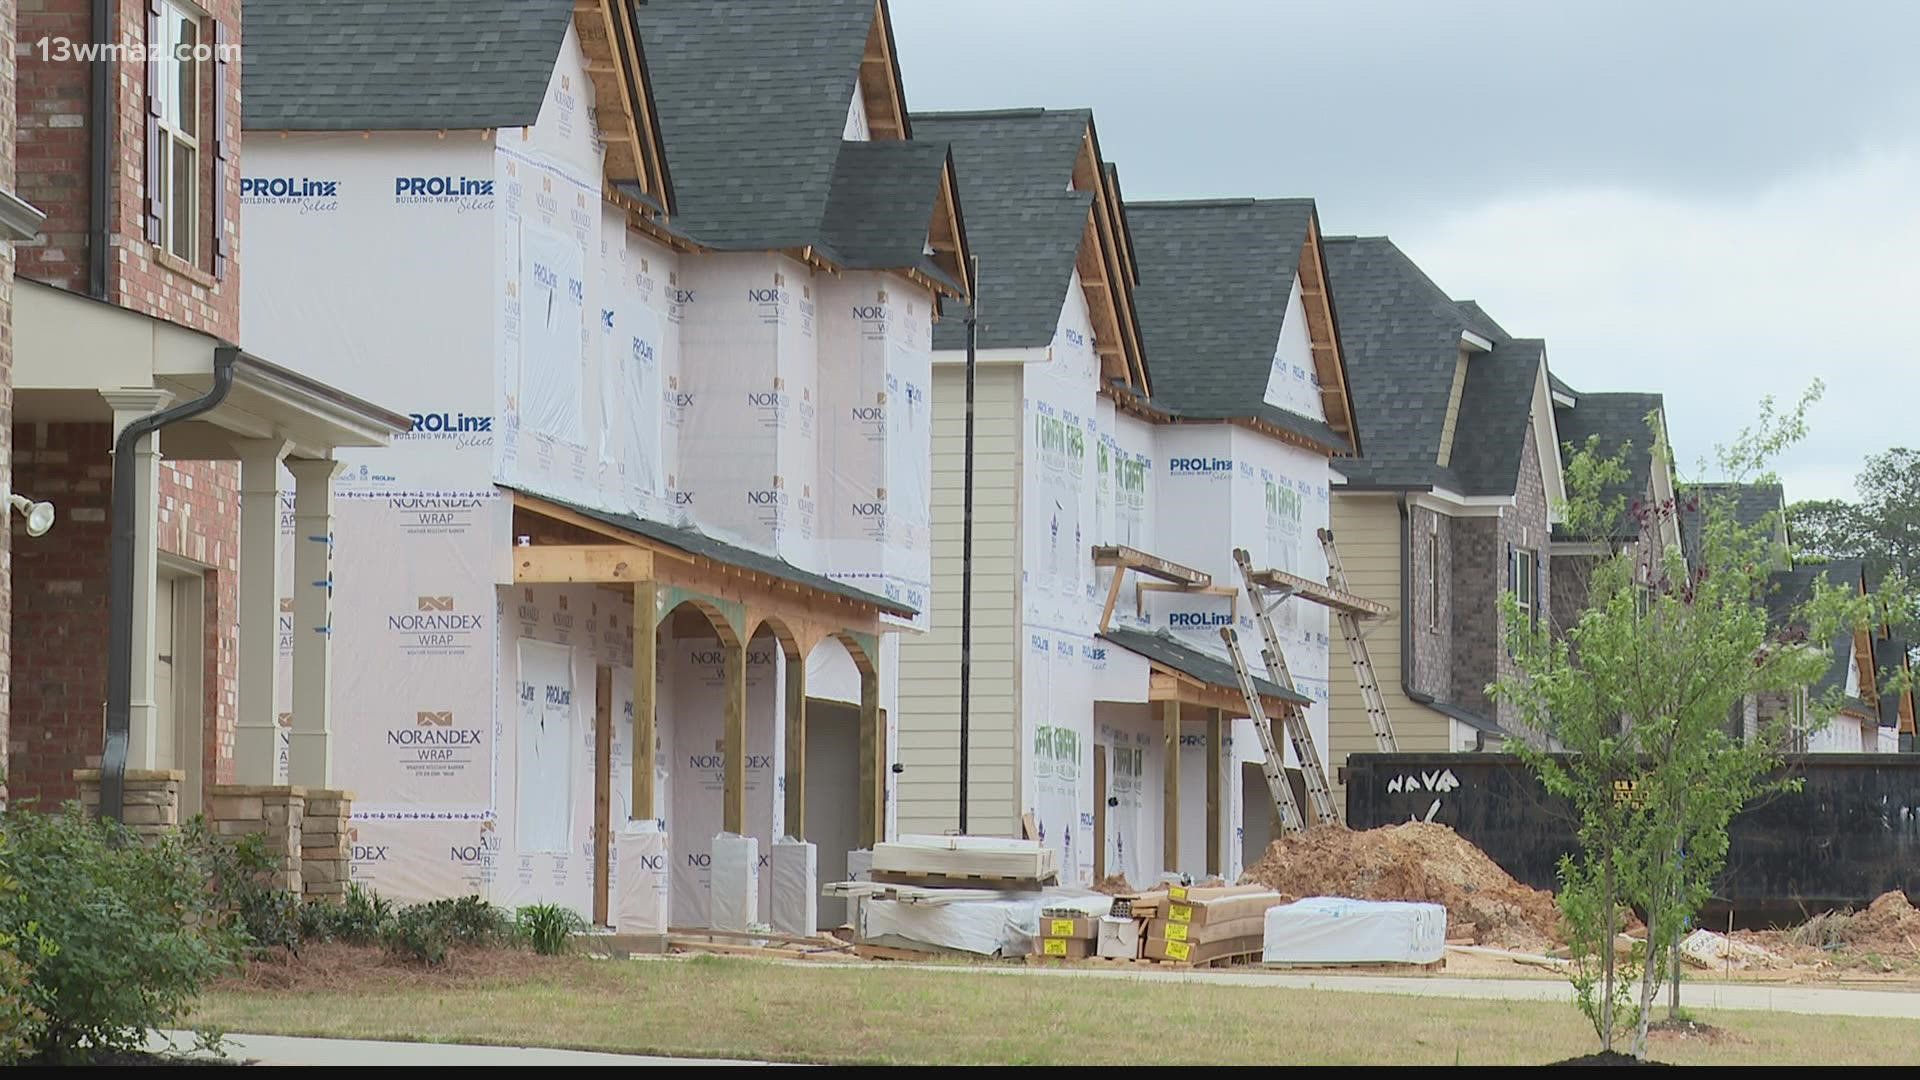 By the end of 2025, they expect to see a 47 percent increase in new apartments and other housing to make sure Robins keeps booming.